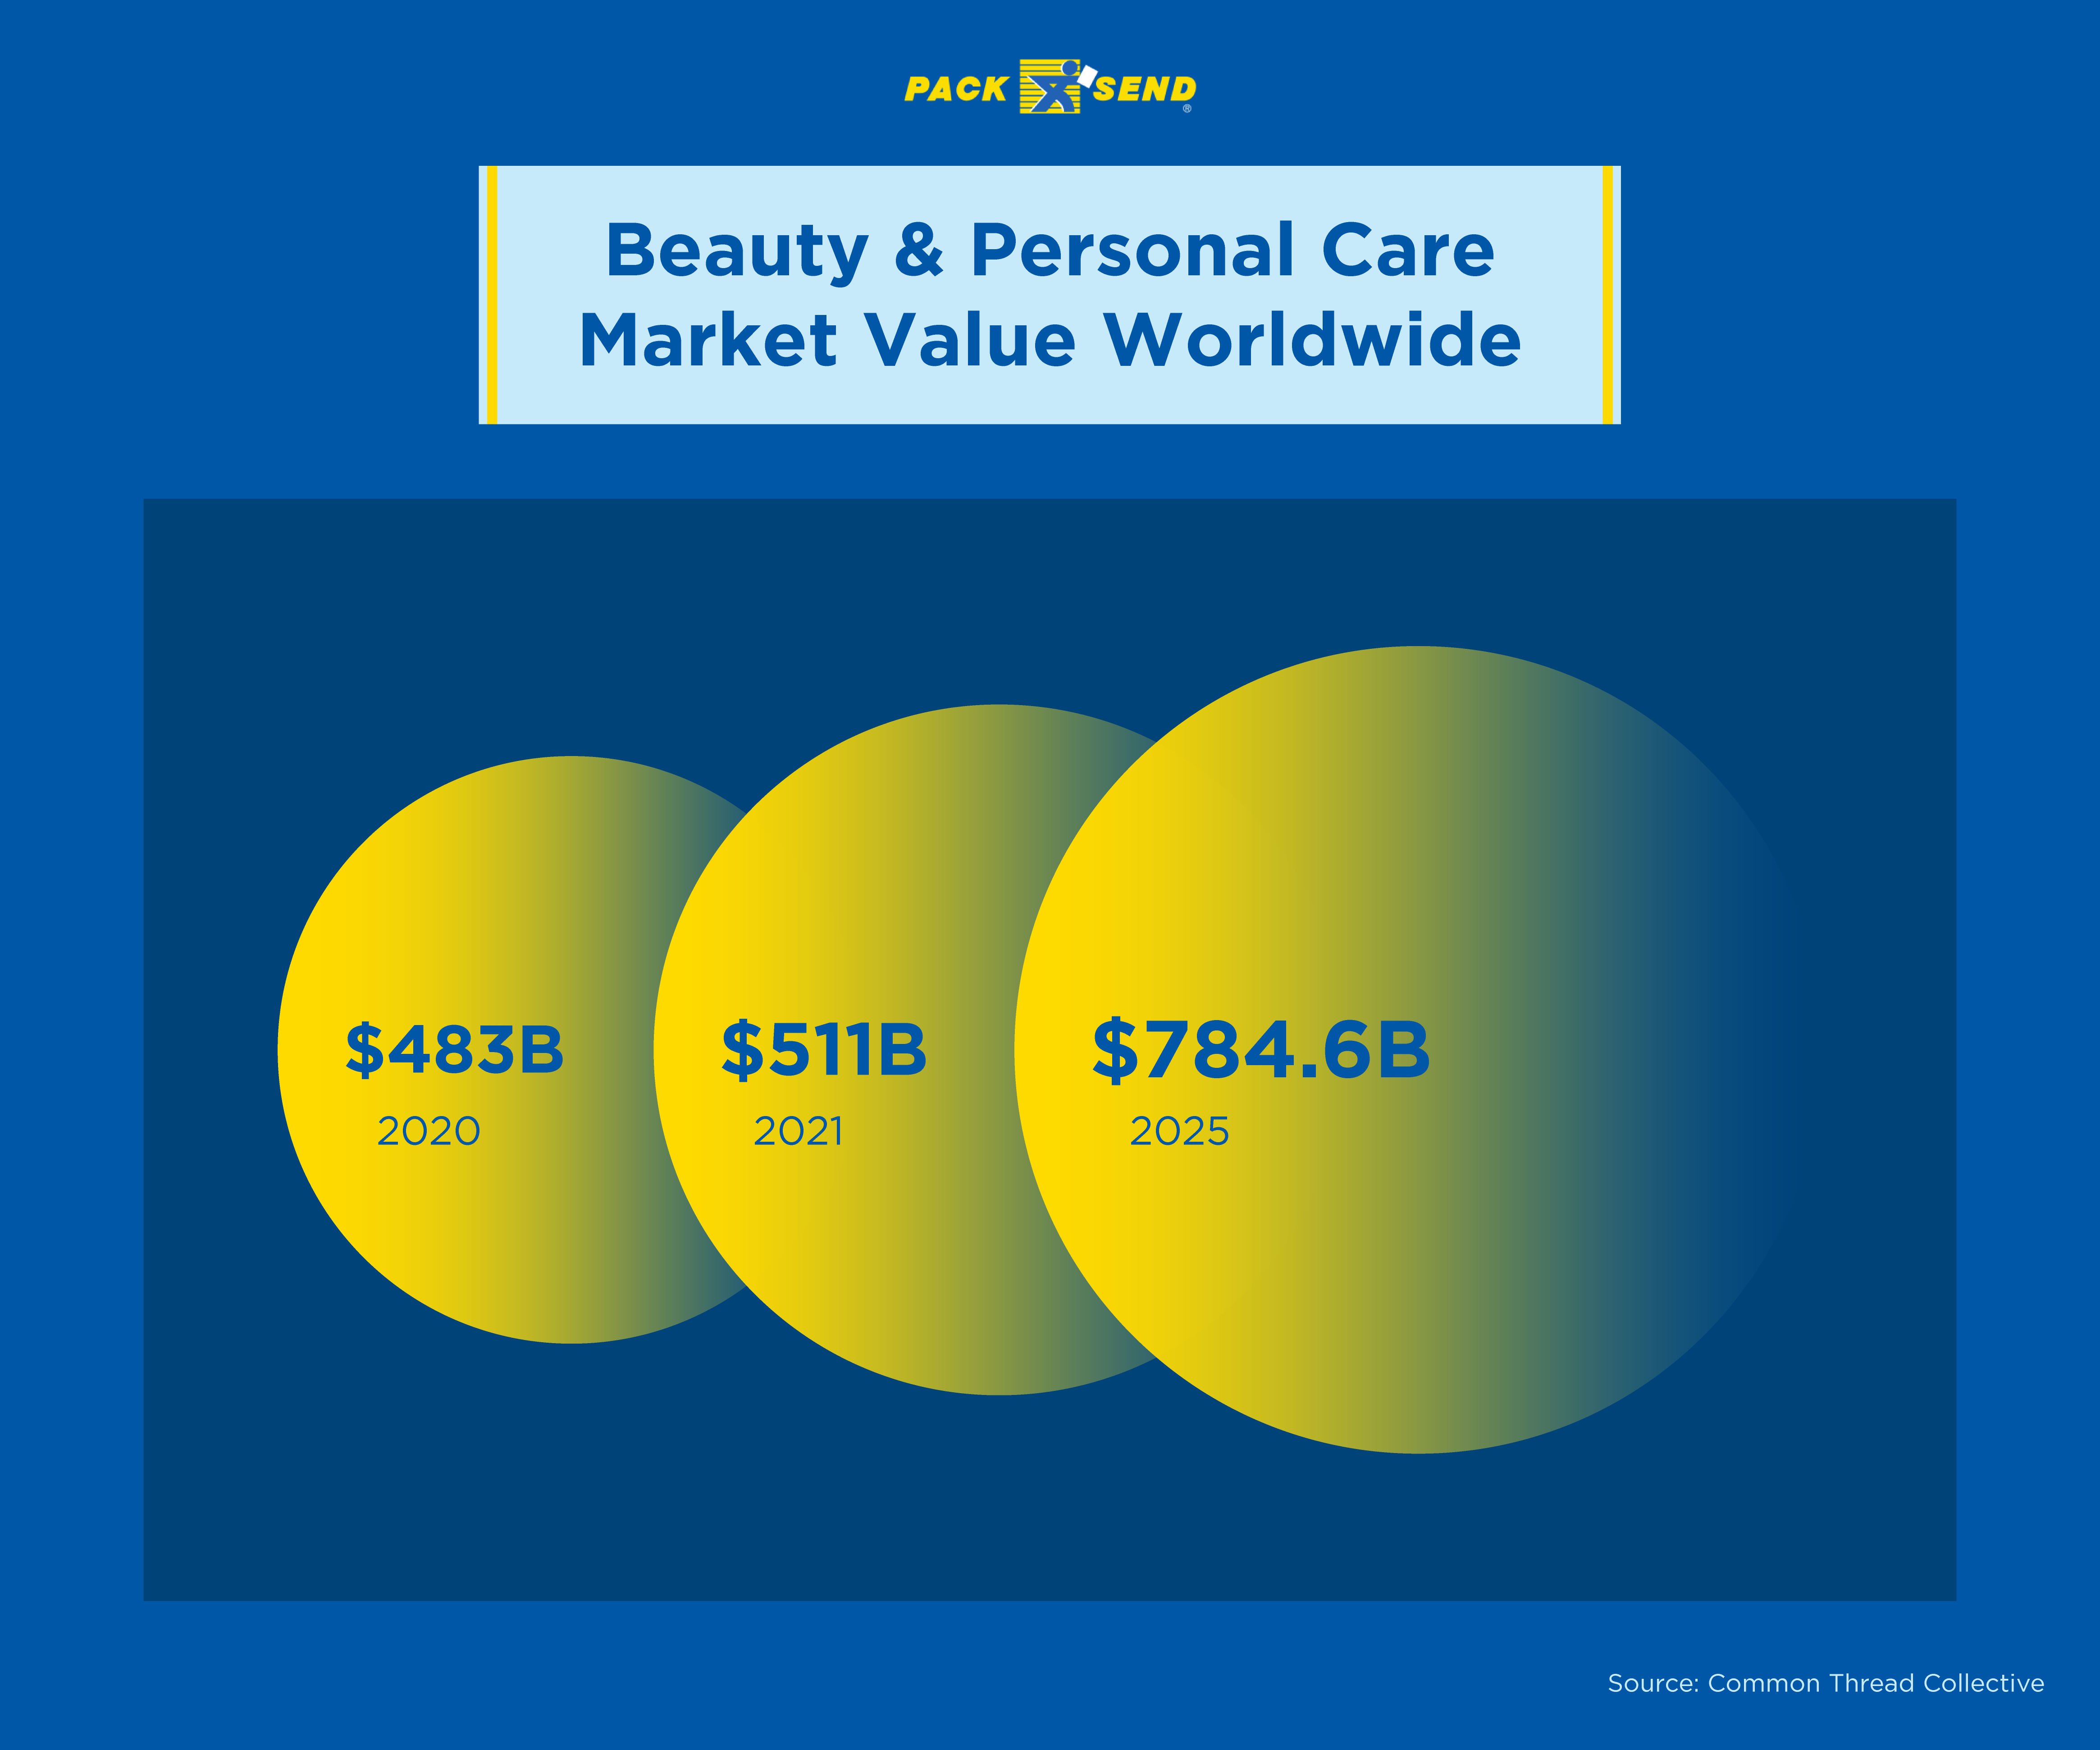 Worldwide market value of beauty and personal care products